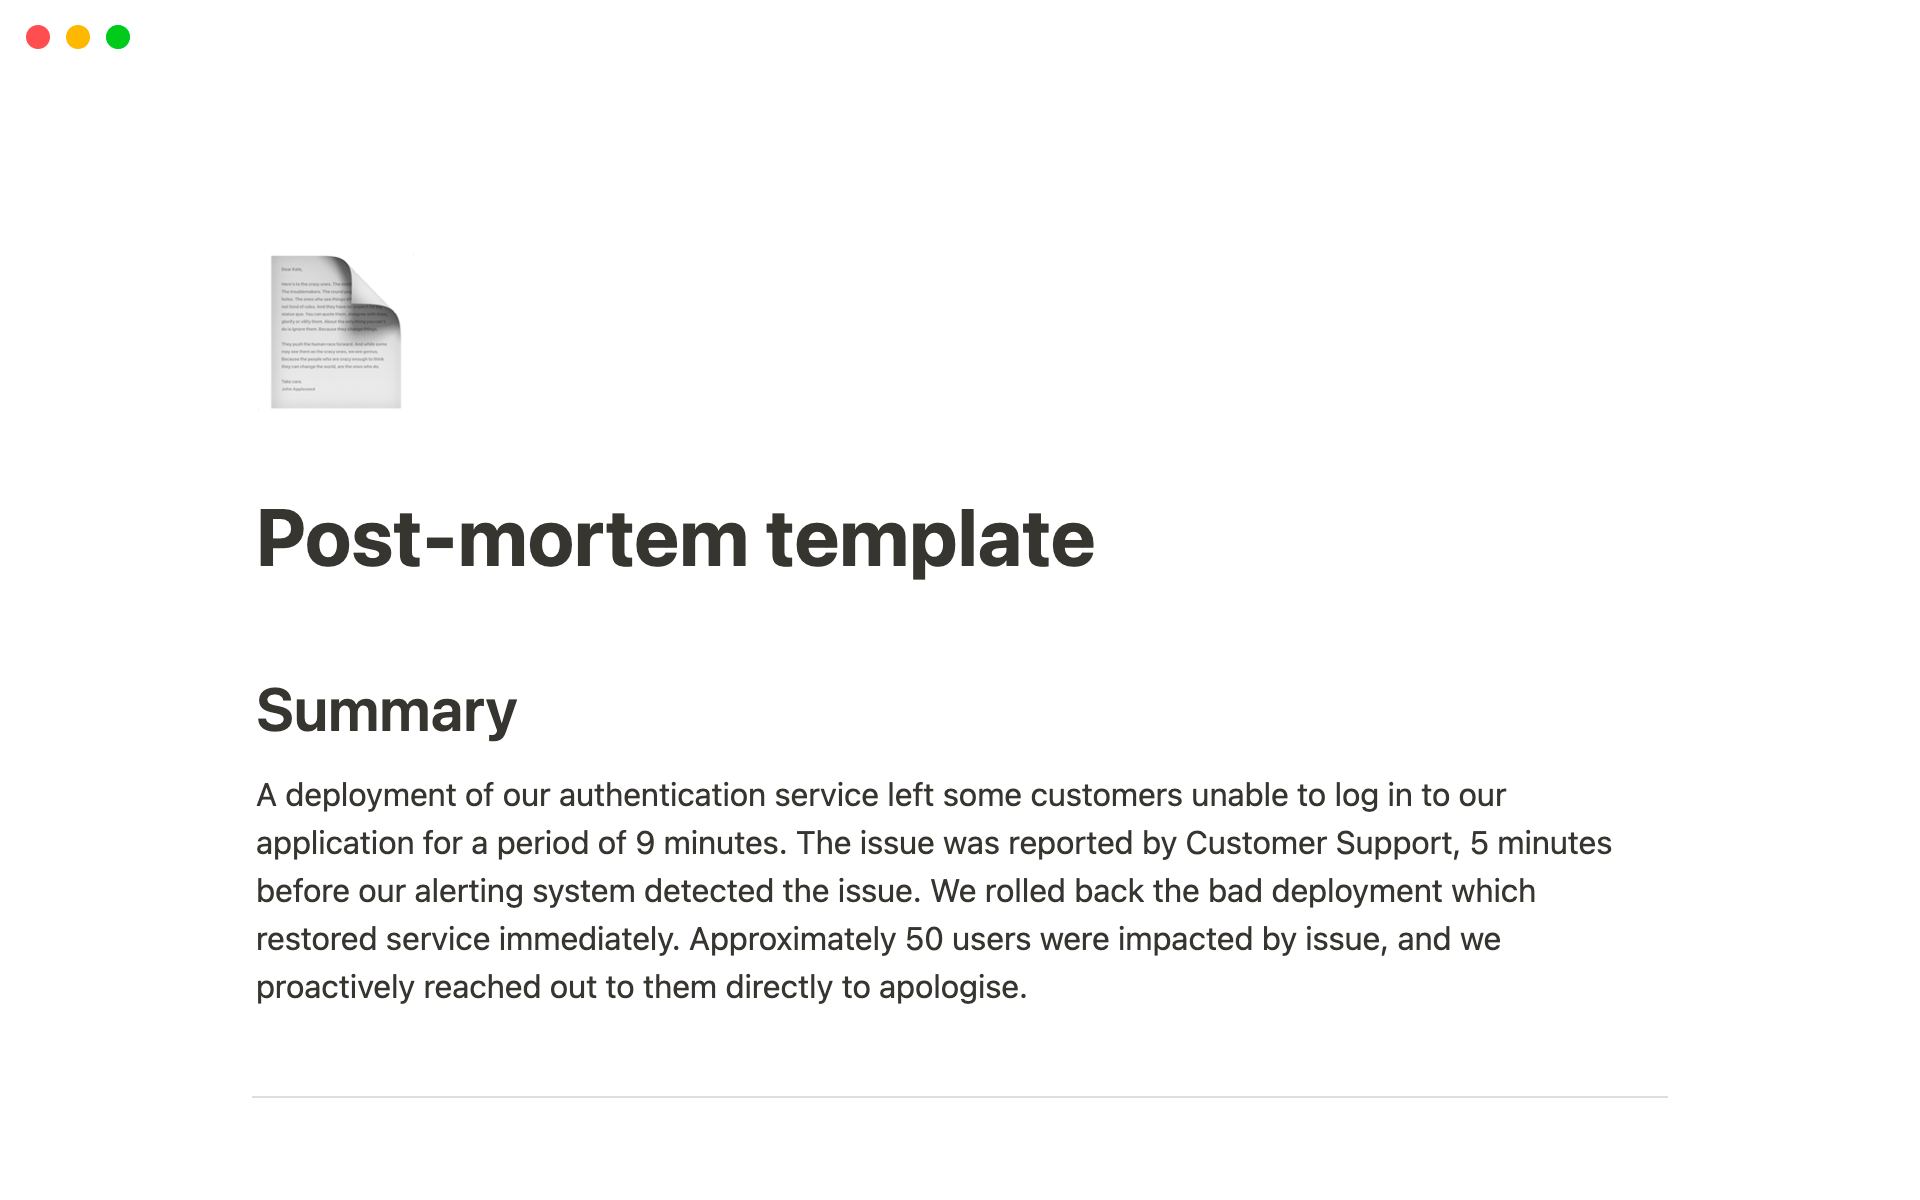 It's a base template for engineering teams who want to use Notion to store the incident post-mortem documents.